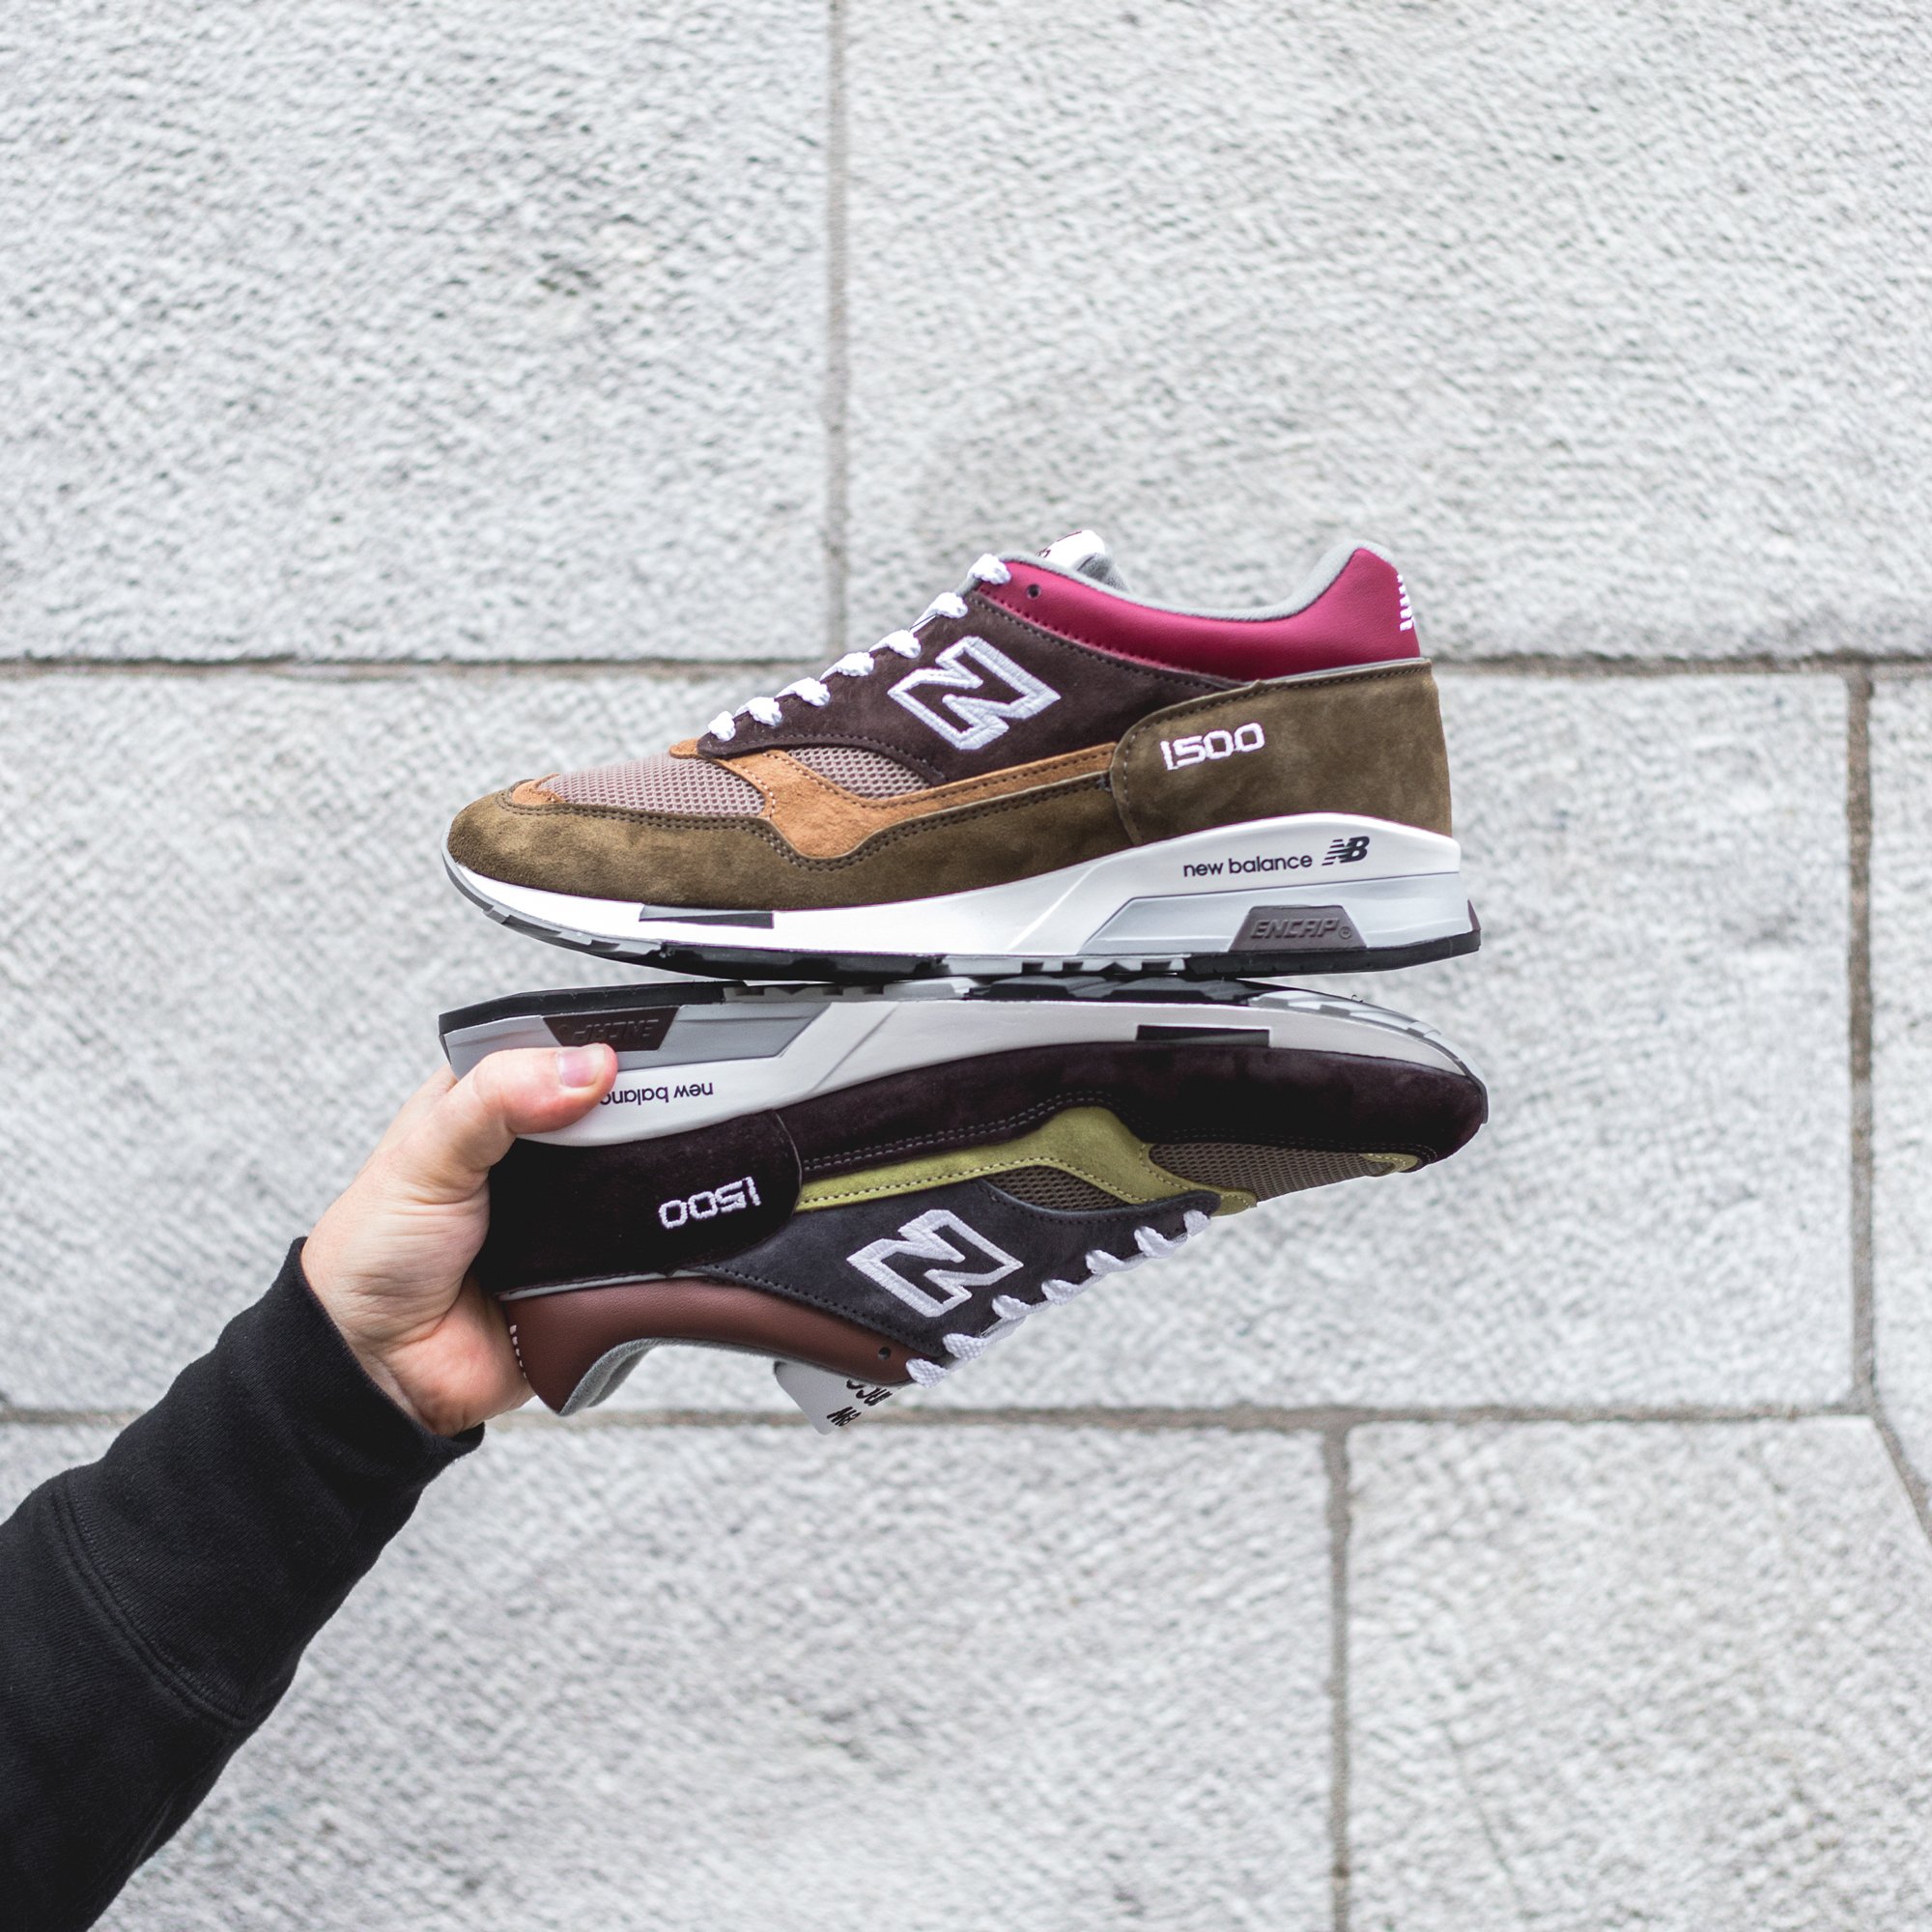 SNS on Twitter: "The New Balance M1500BGG &amp; M1500GBG just landed 🛬 Take a closer look: https://t.co/nEIdIEsmVK https://t.co/xOy3u50kWY" / Twitter